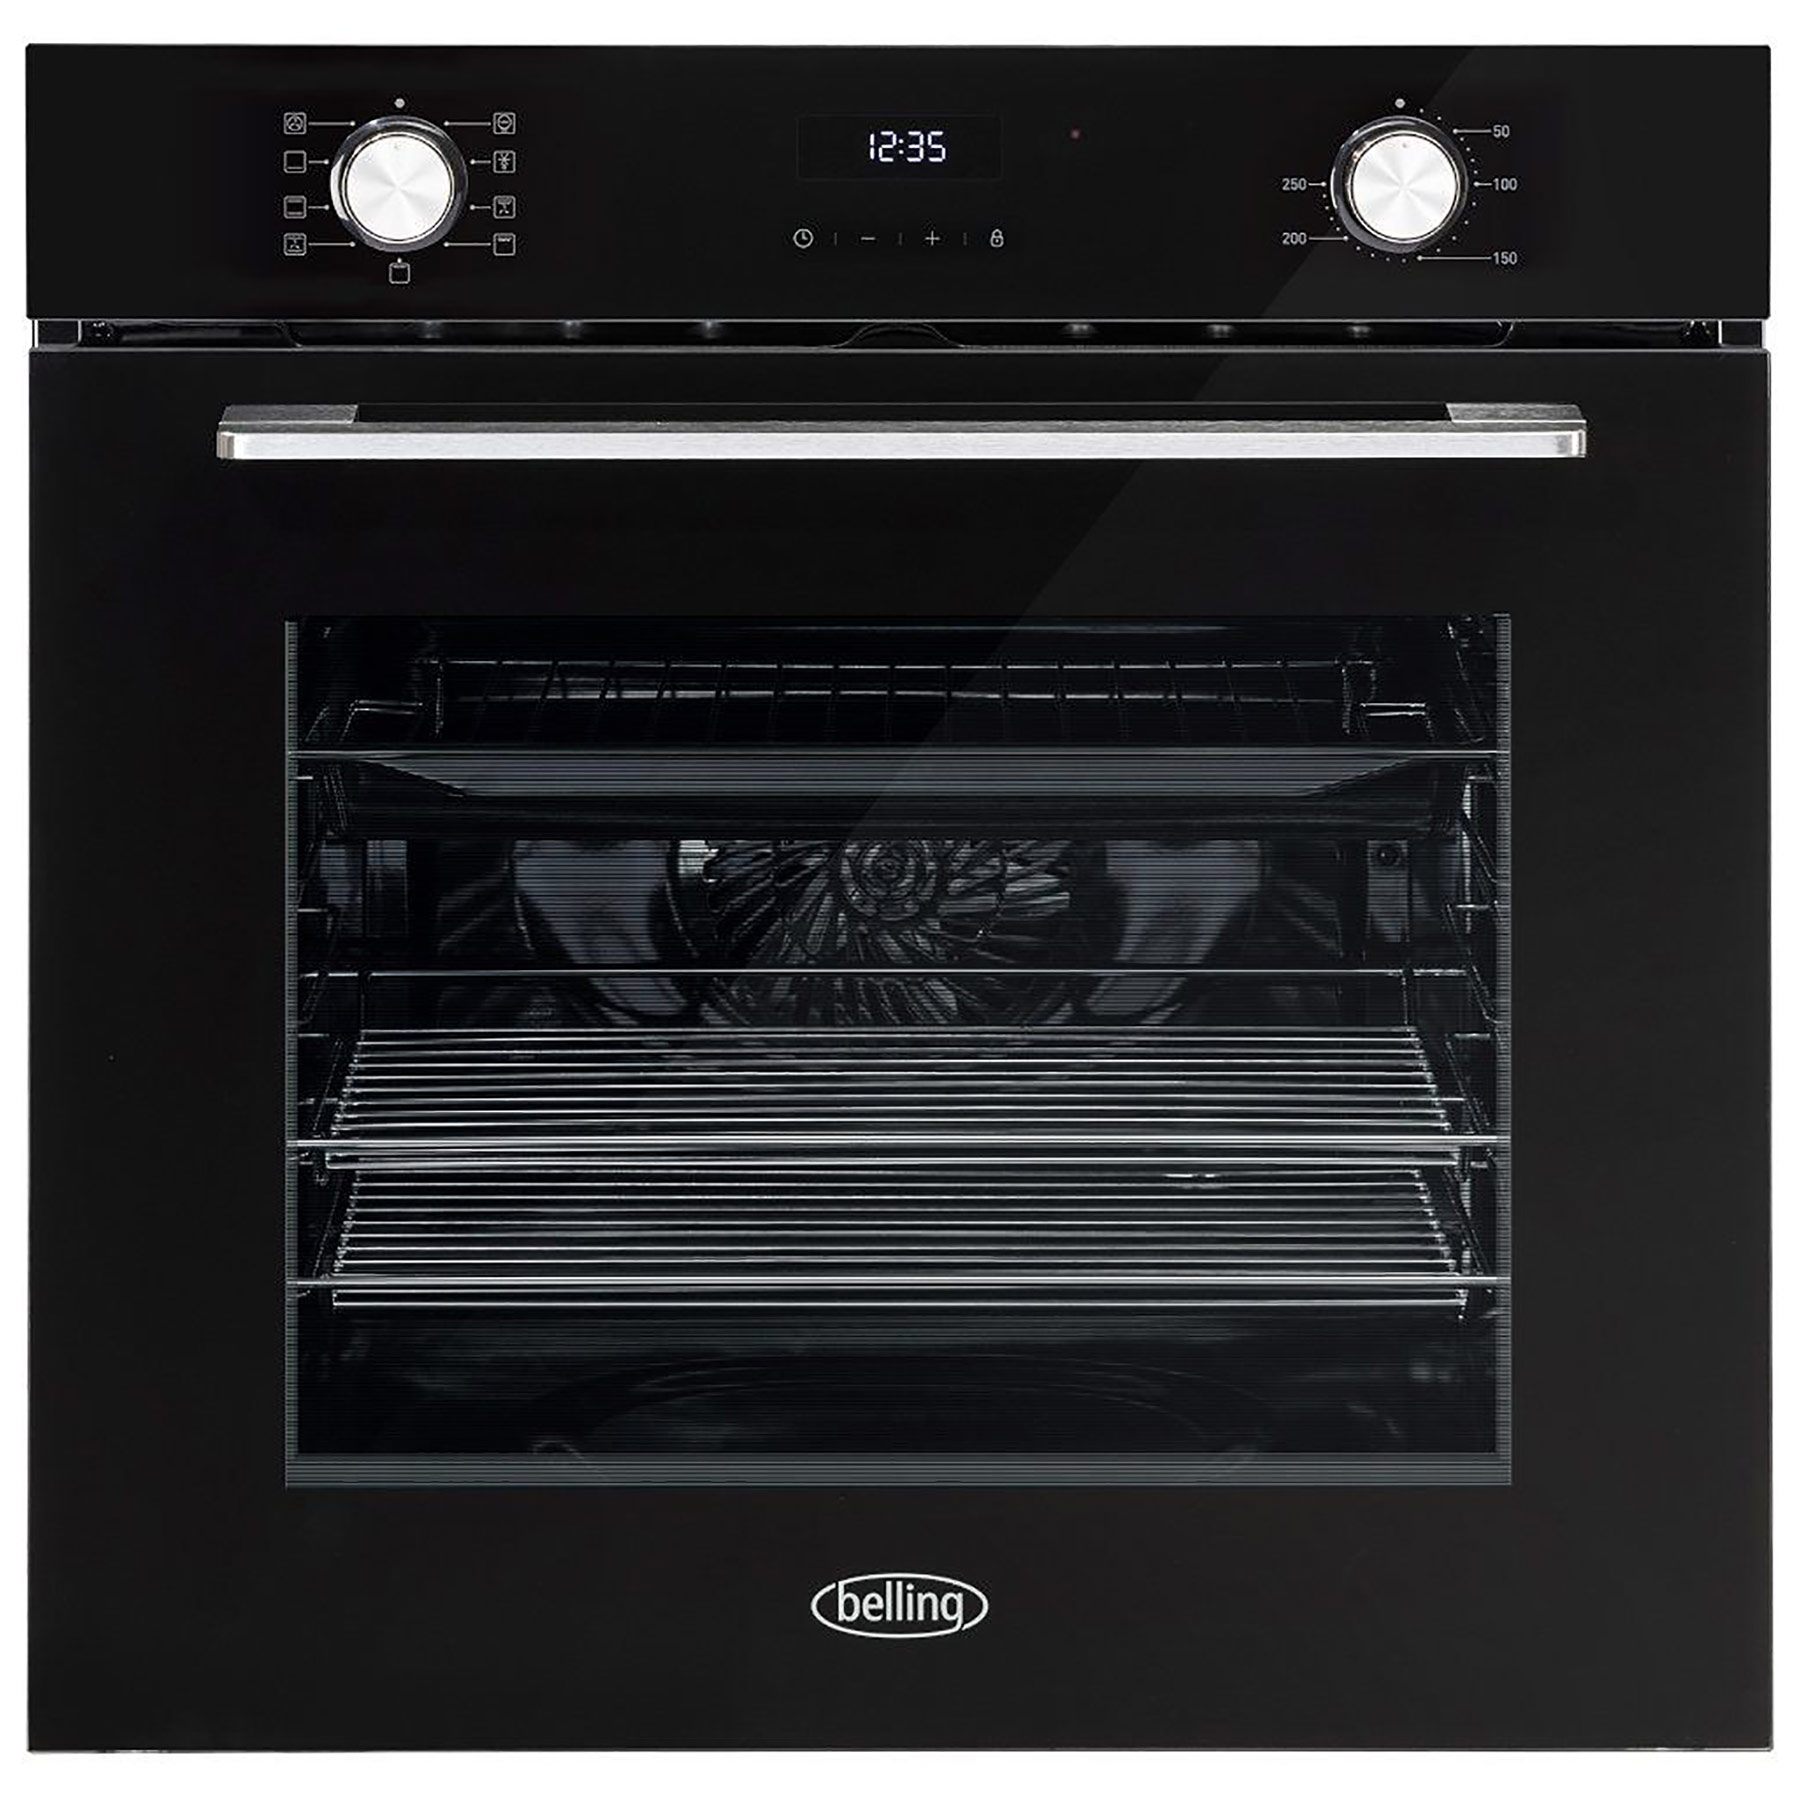 Image of Belling 444411400 Built In Electric Single Oven in Black 72L